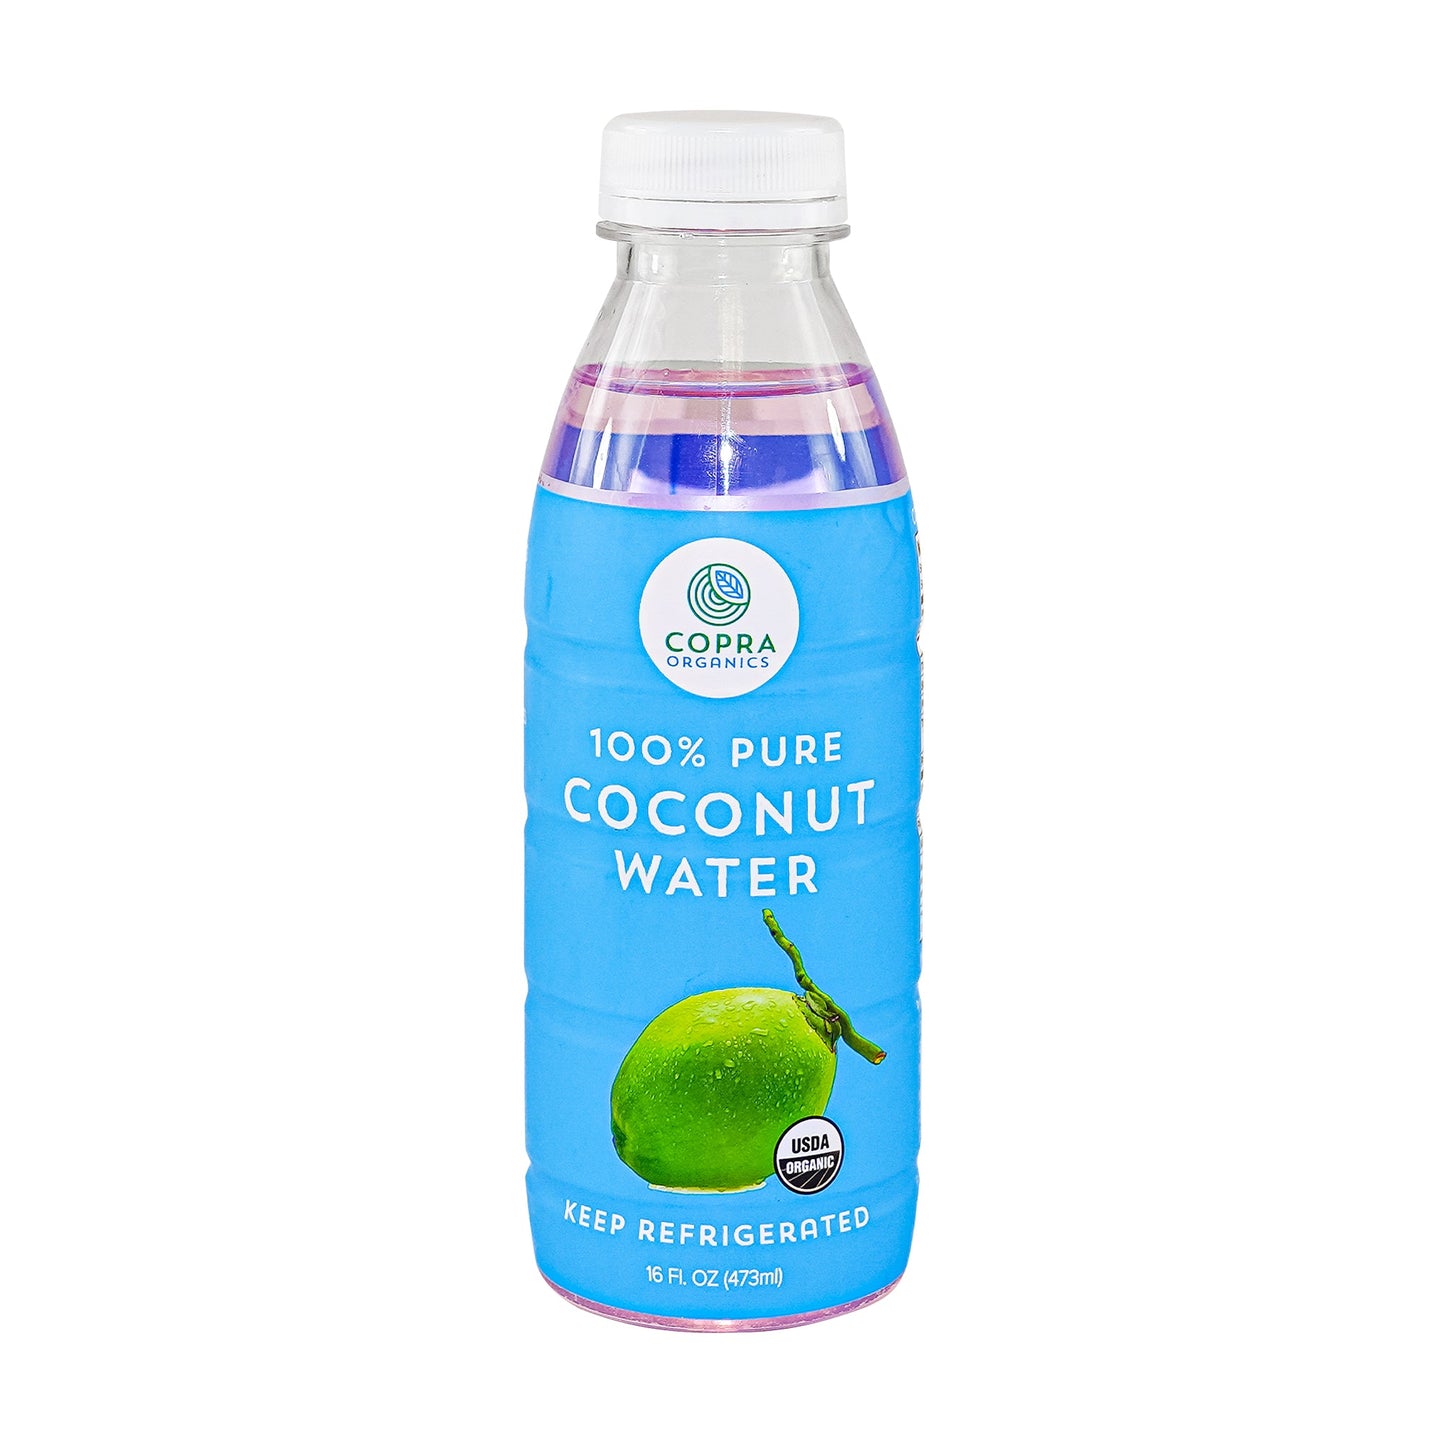 Bottle of Nam Hom Organic 100% Pure Coconut Water From Thailand by Copra Coconut